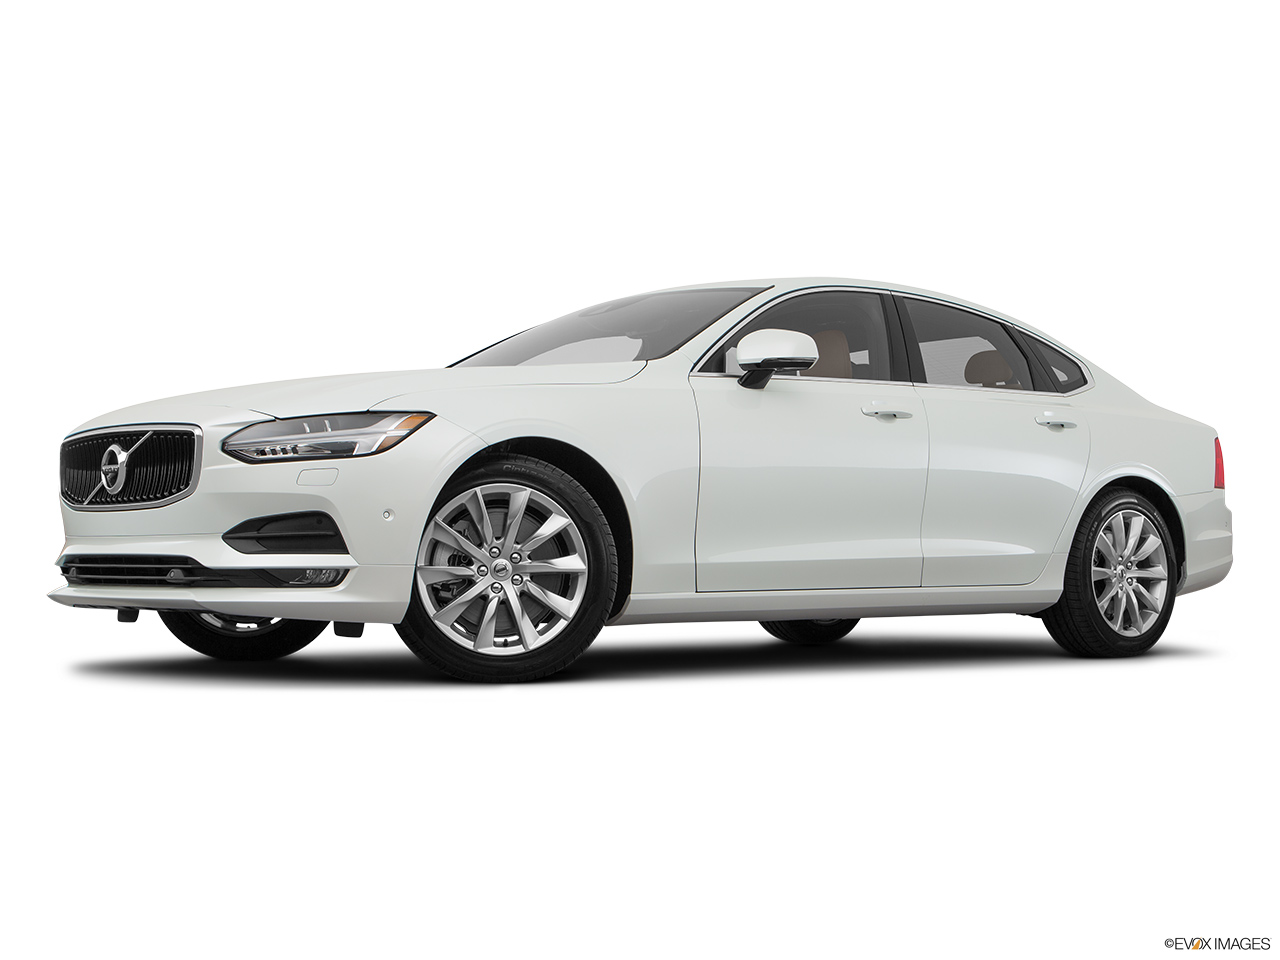 2017 Volvo S90 T6 Momentum Low/wide front 5/8. 